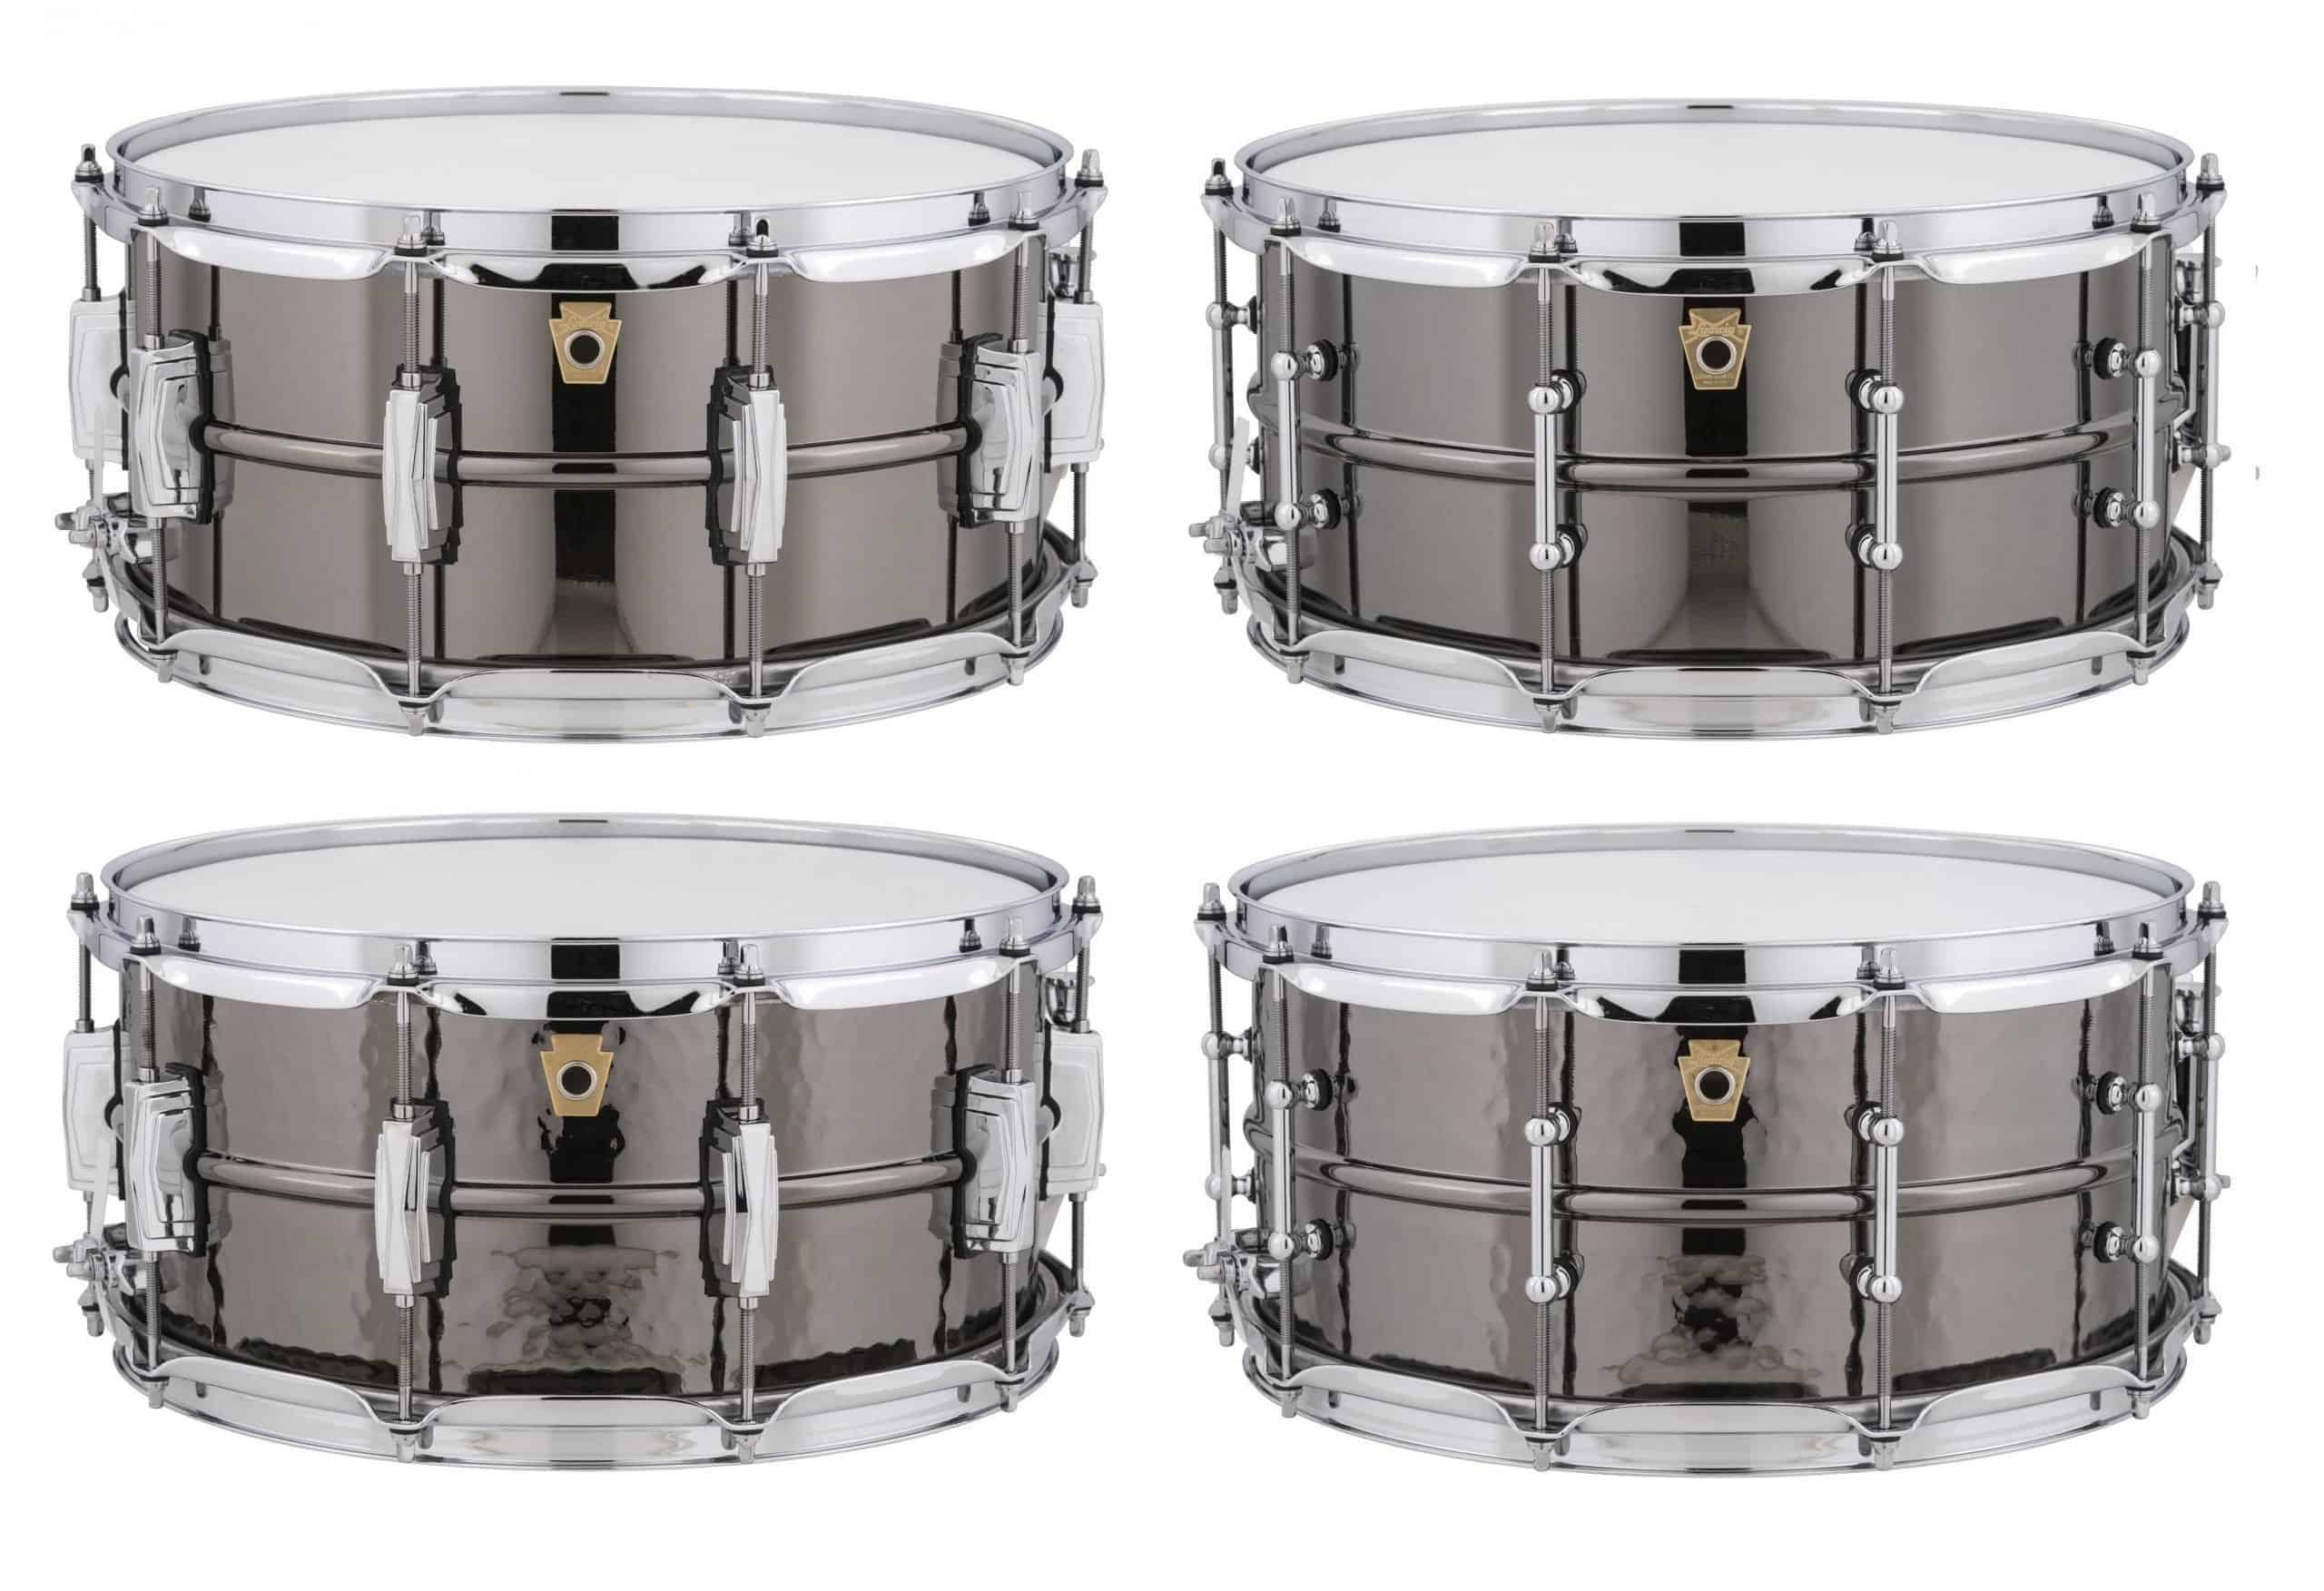 Ludwig Black Beauty 6.5x14" Snare Drum